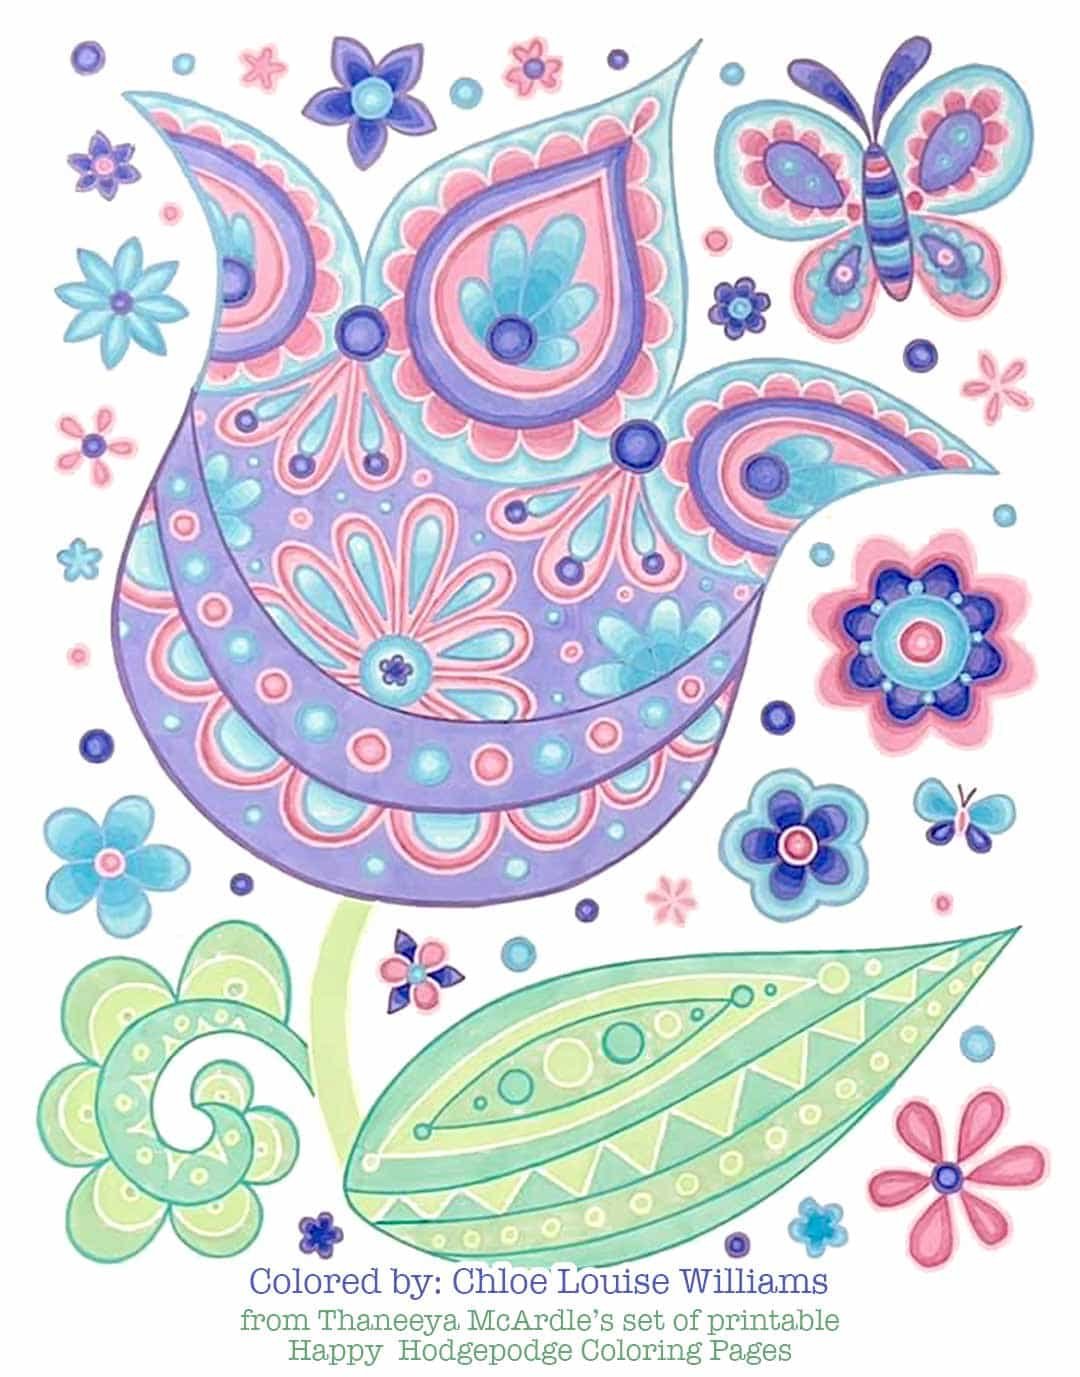 Groovy tulip coloring page from Thaneeya McArdle's set of printable Happy Hodgepodge Coloring Pages